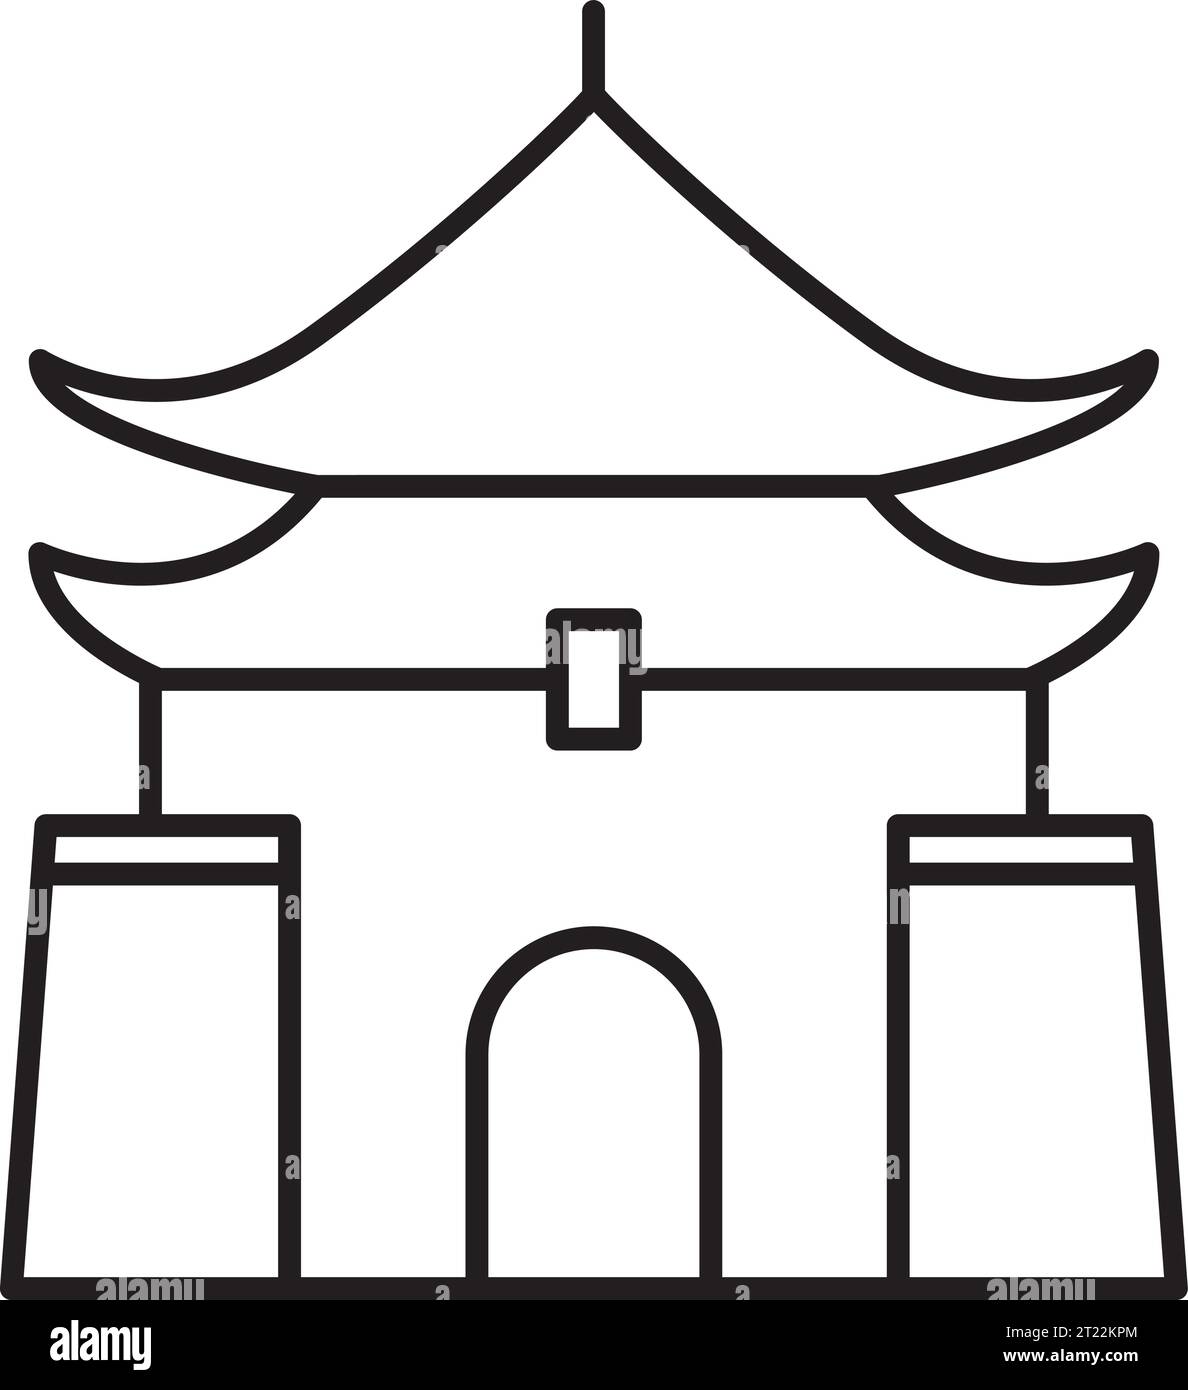 Simple black outline drawing of the CHIANG KAI-SHEK MEMORIAL HALL, TAIPEI Stock Vector